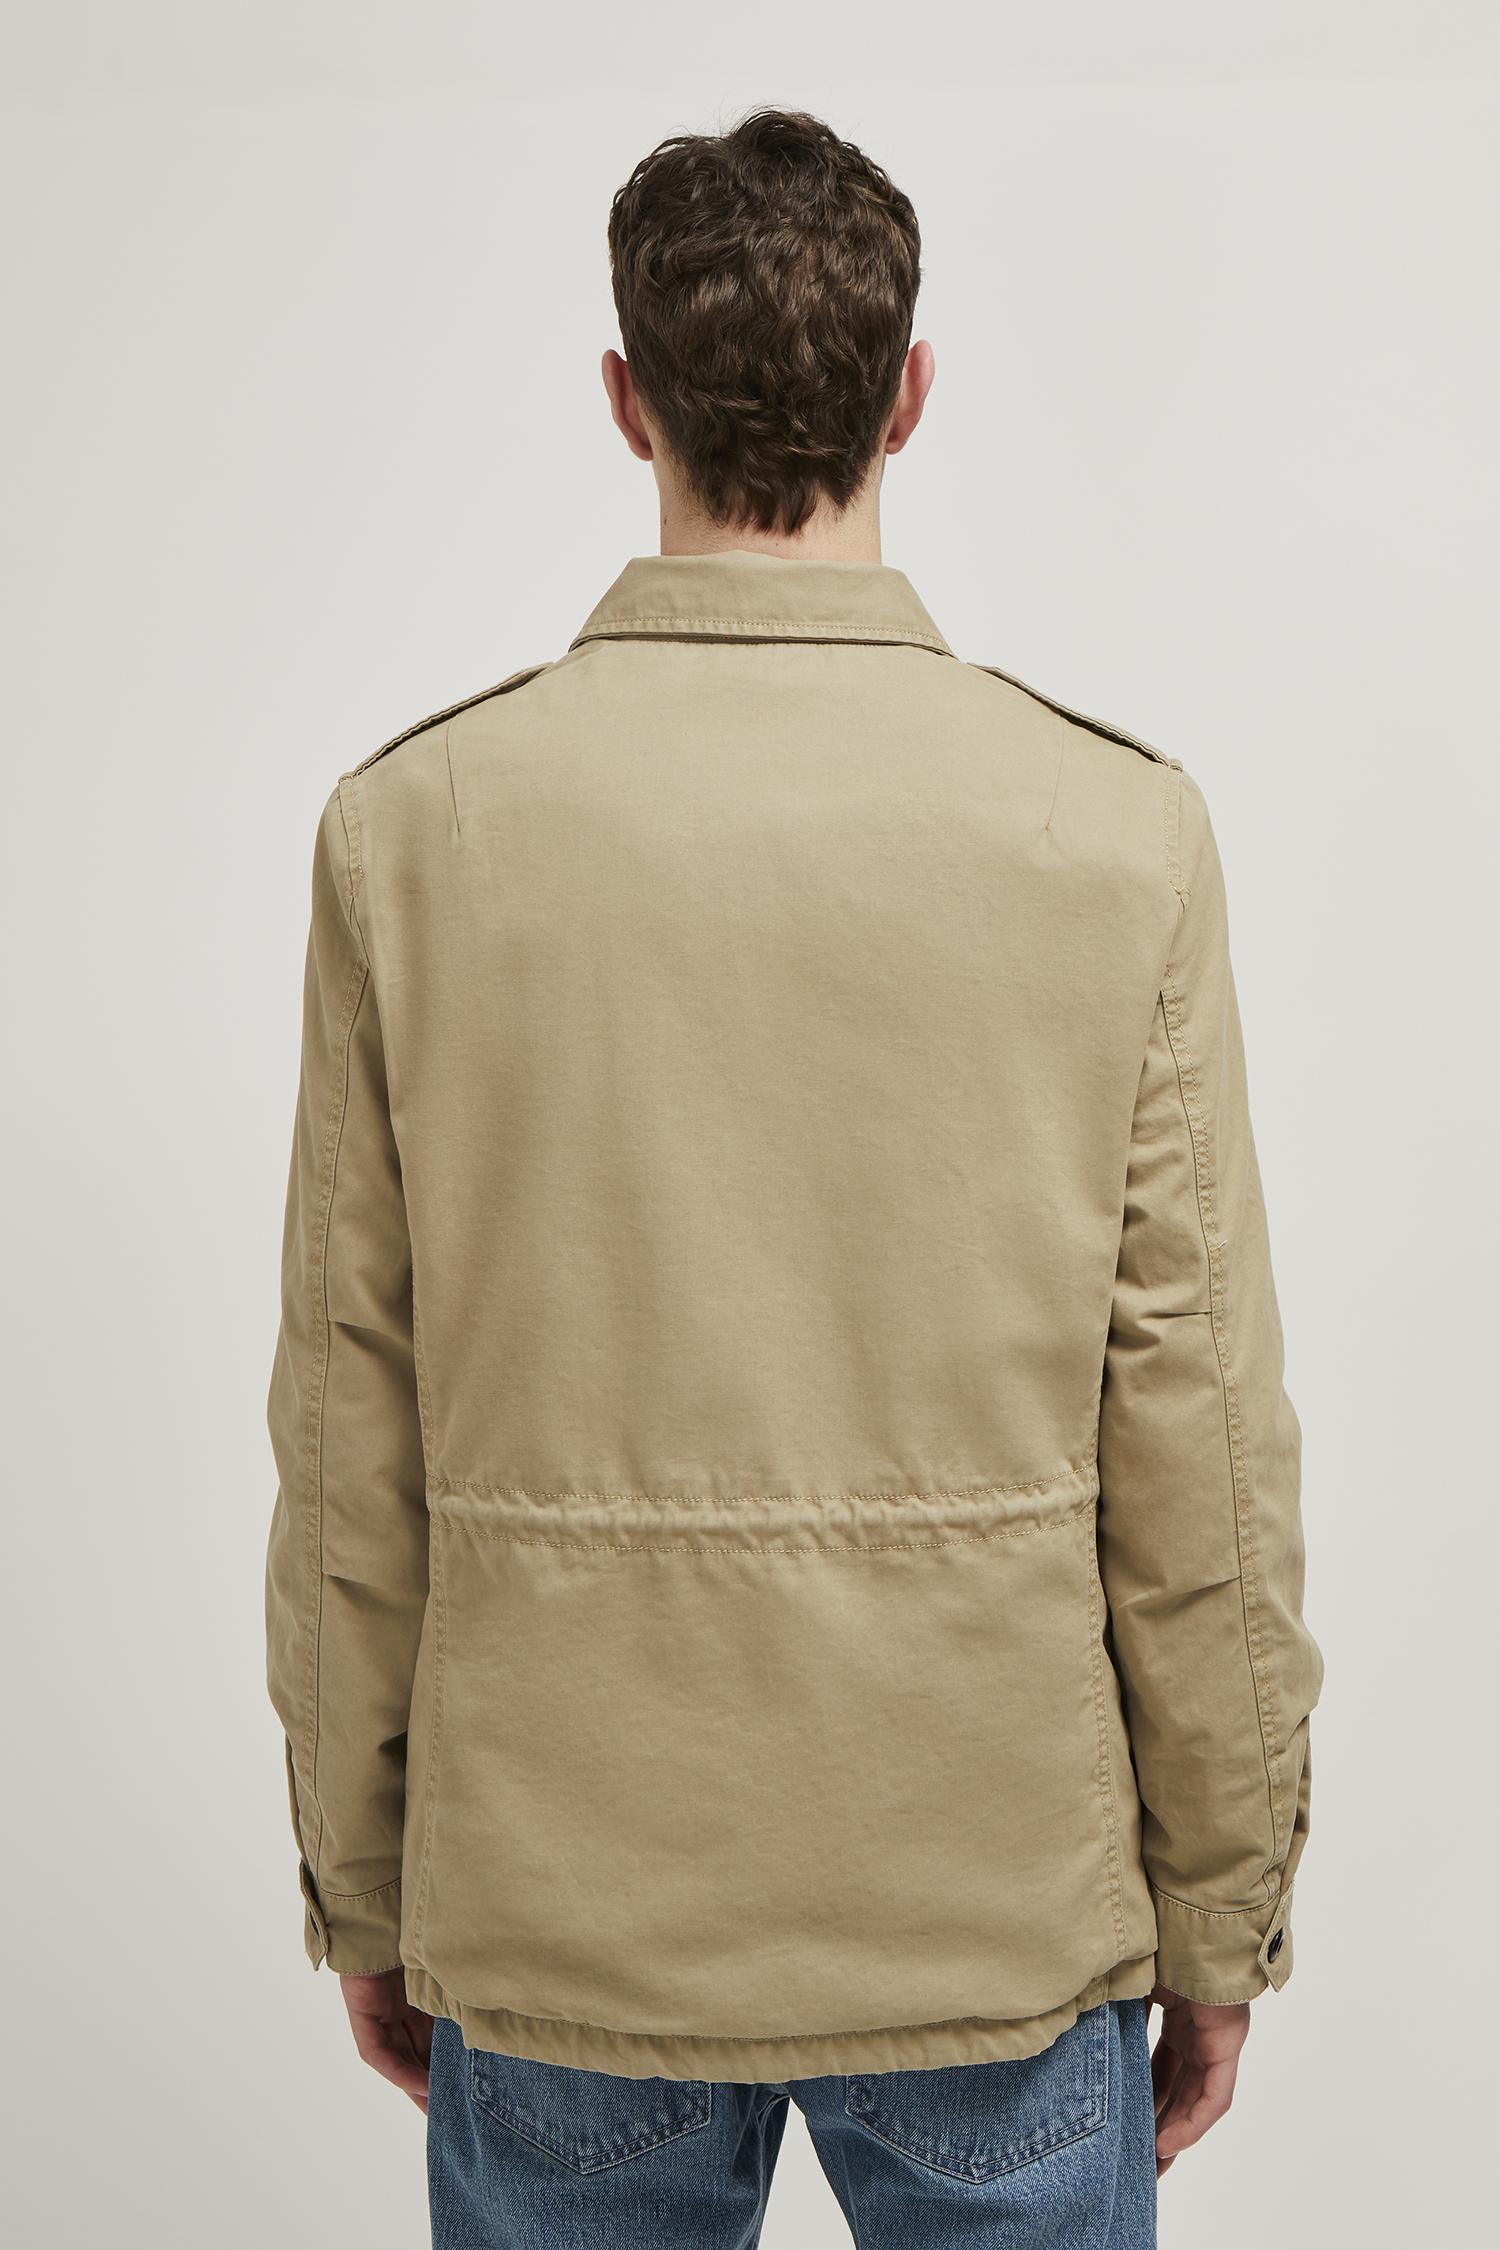 French Connection Cotton Broken Twill Jacket for Men - Lyst